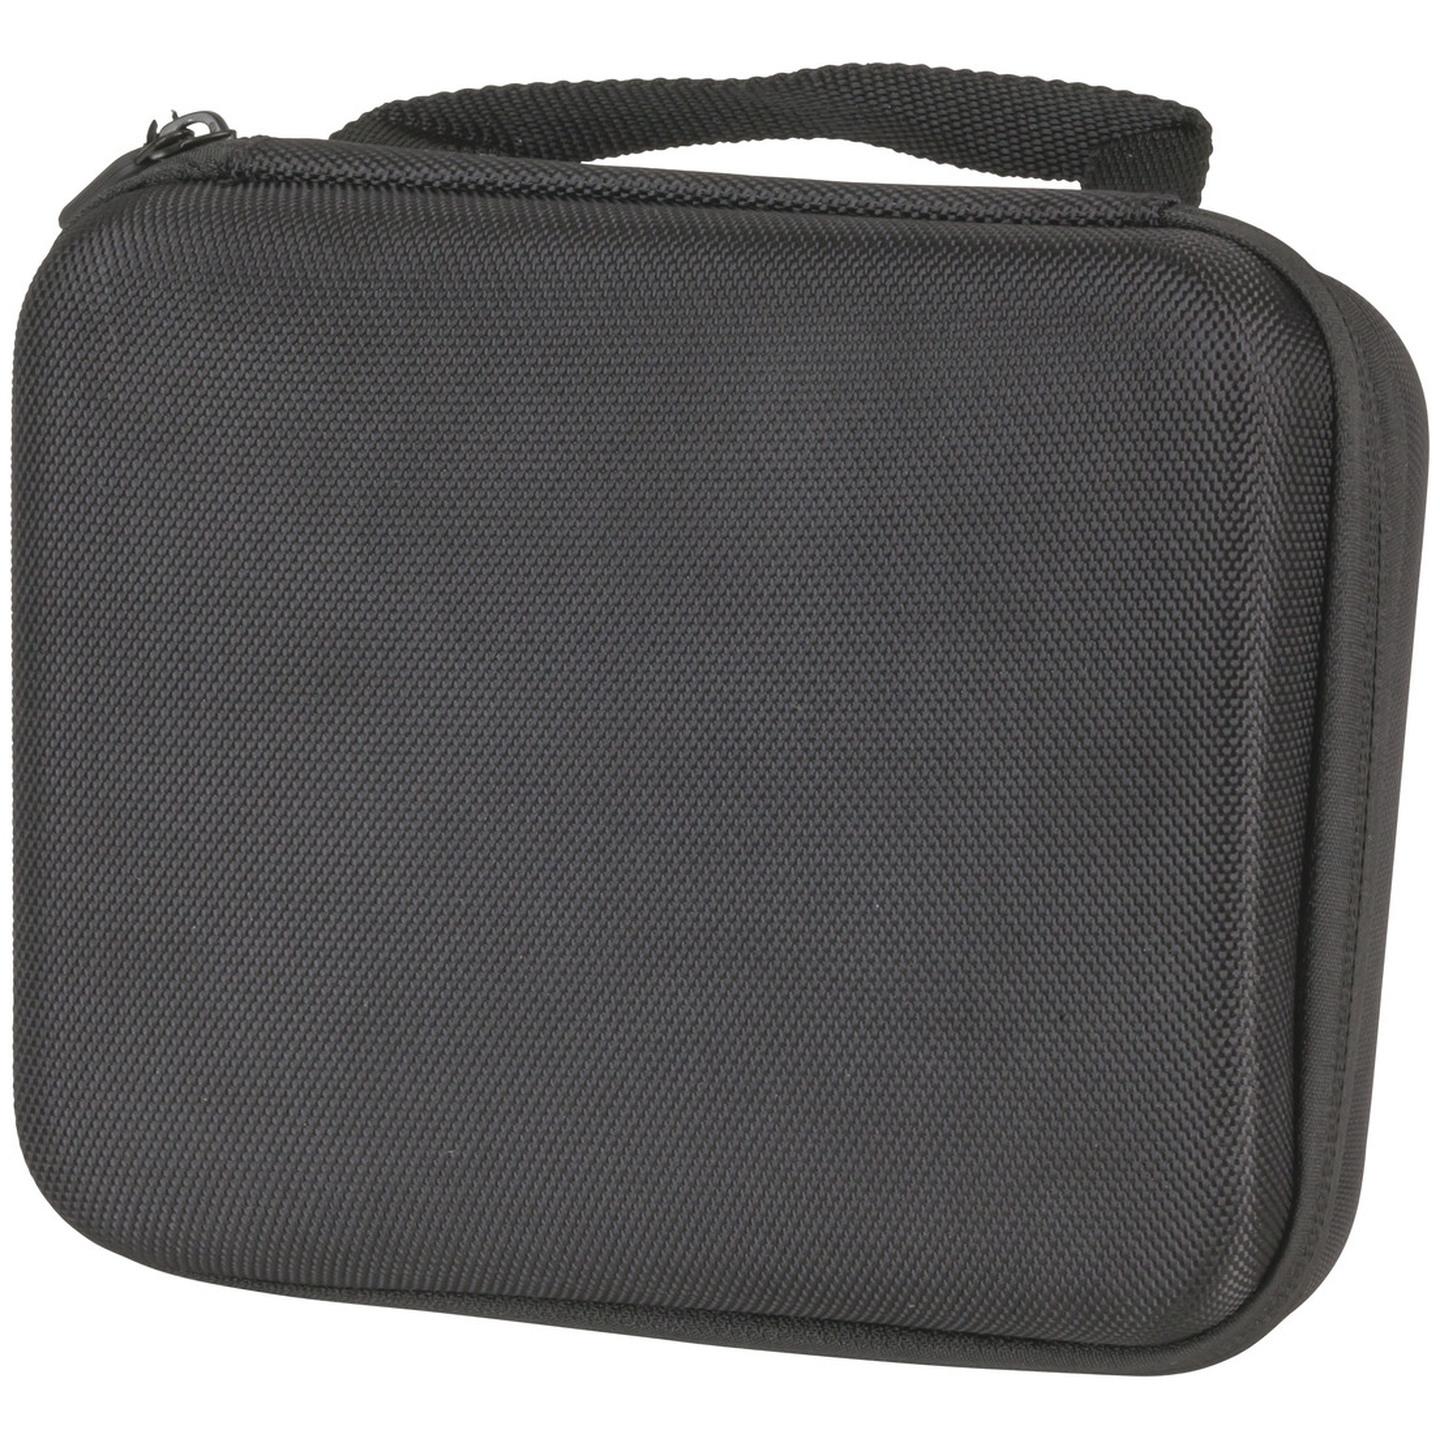 Carry Case for Action Cameras